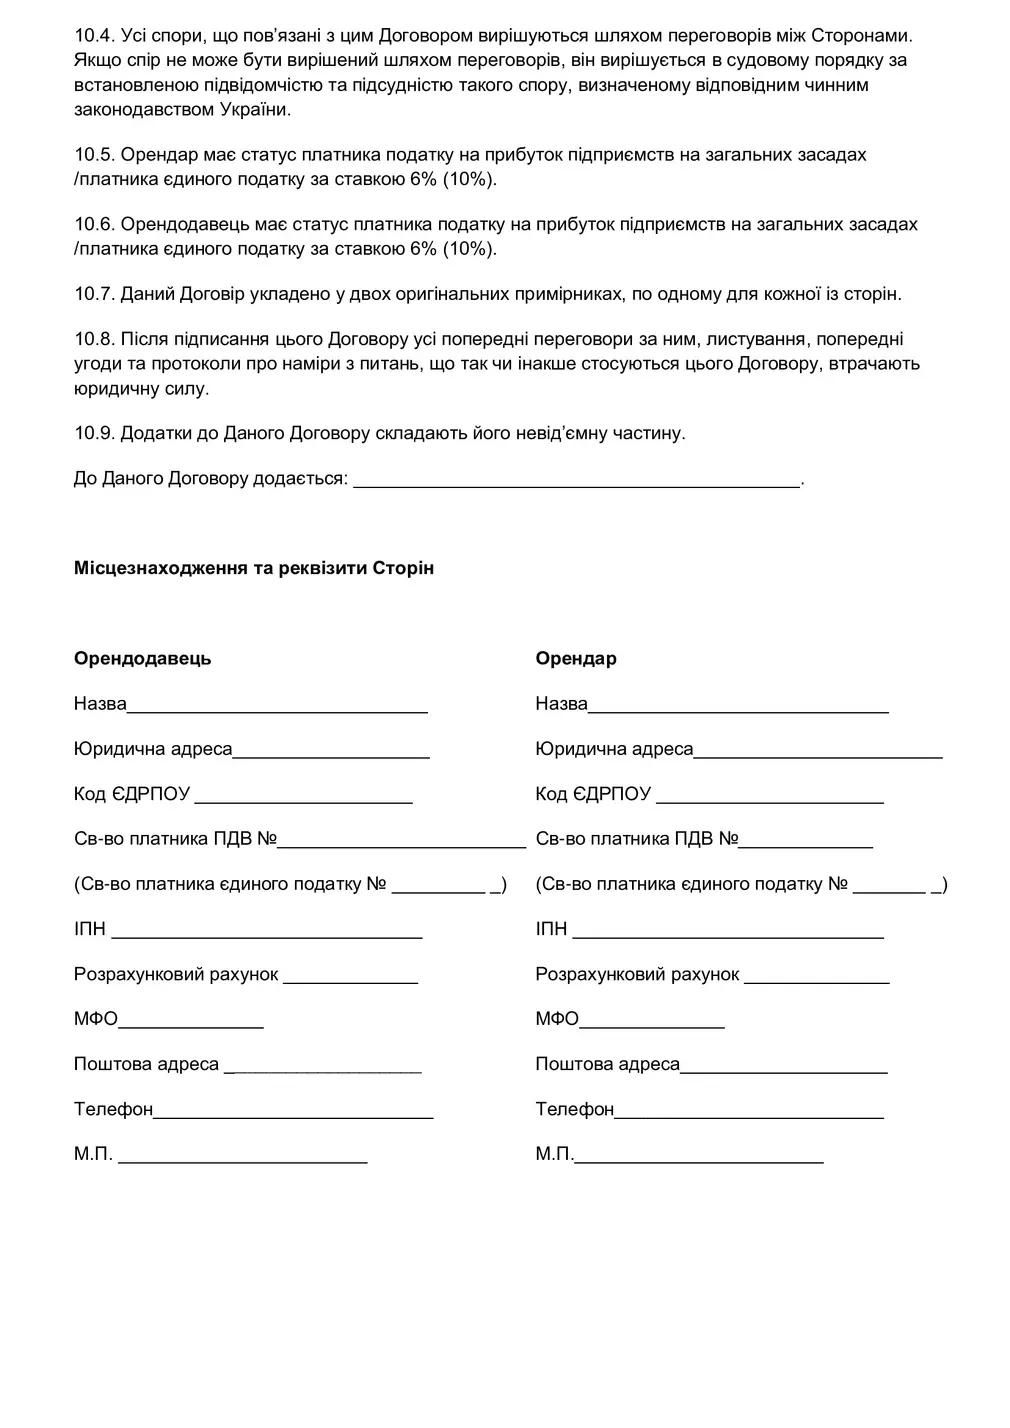 An example of a car rental agreement 3